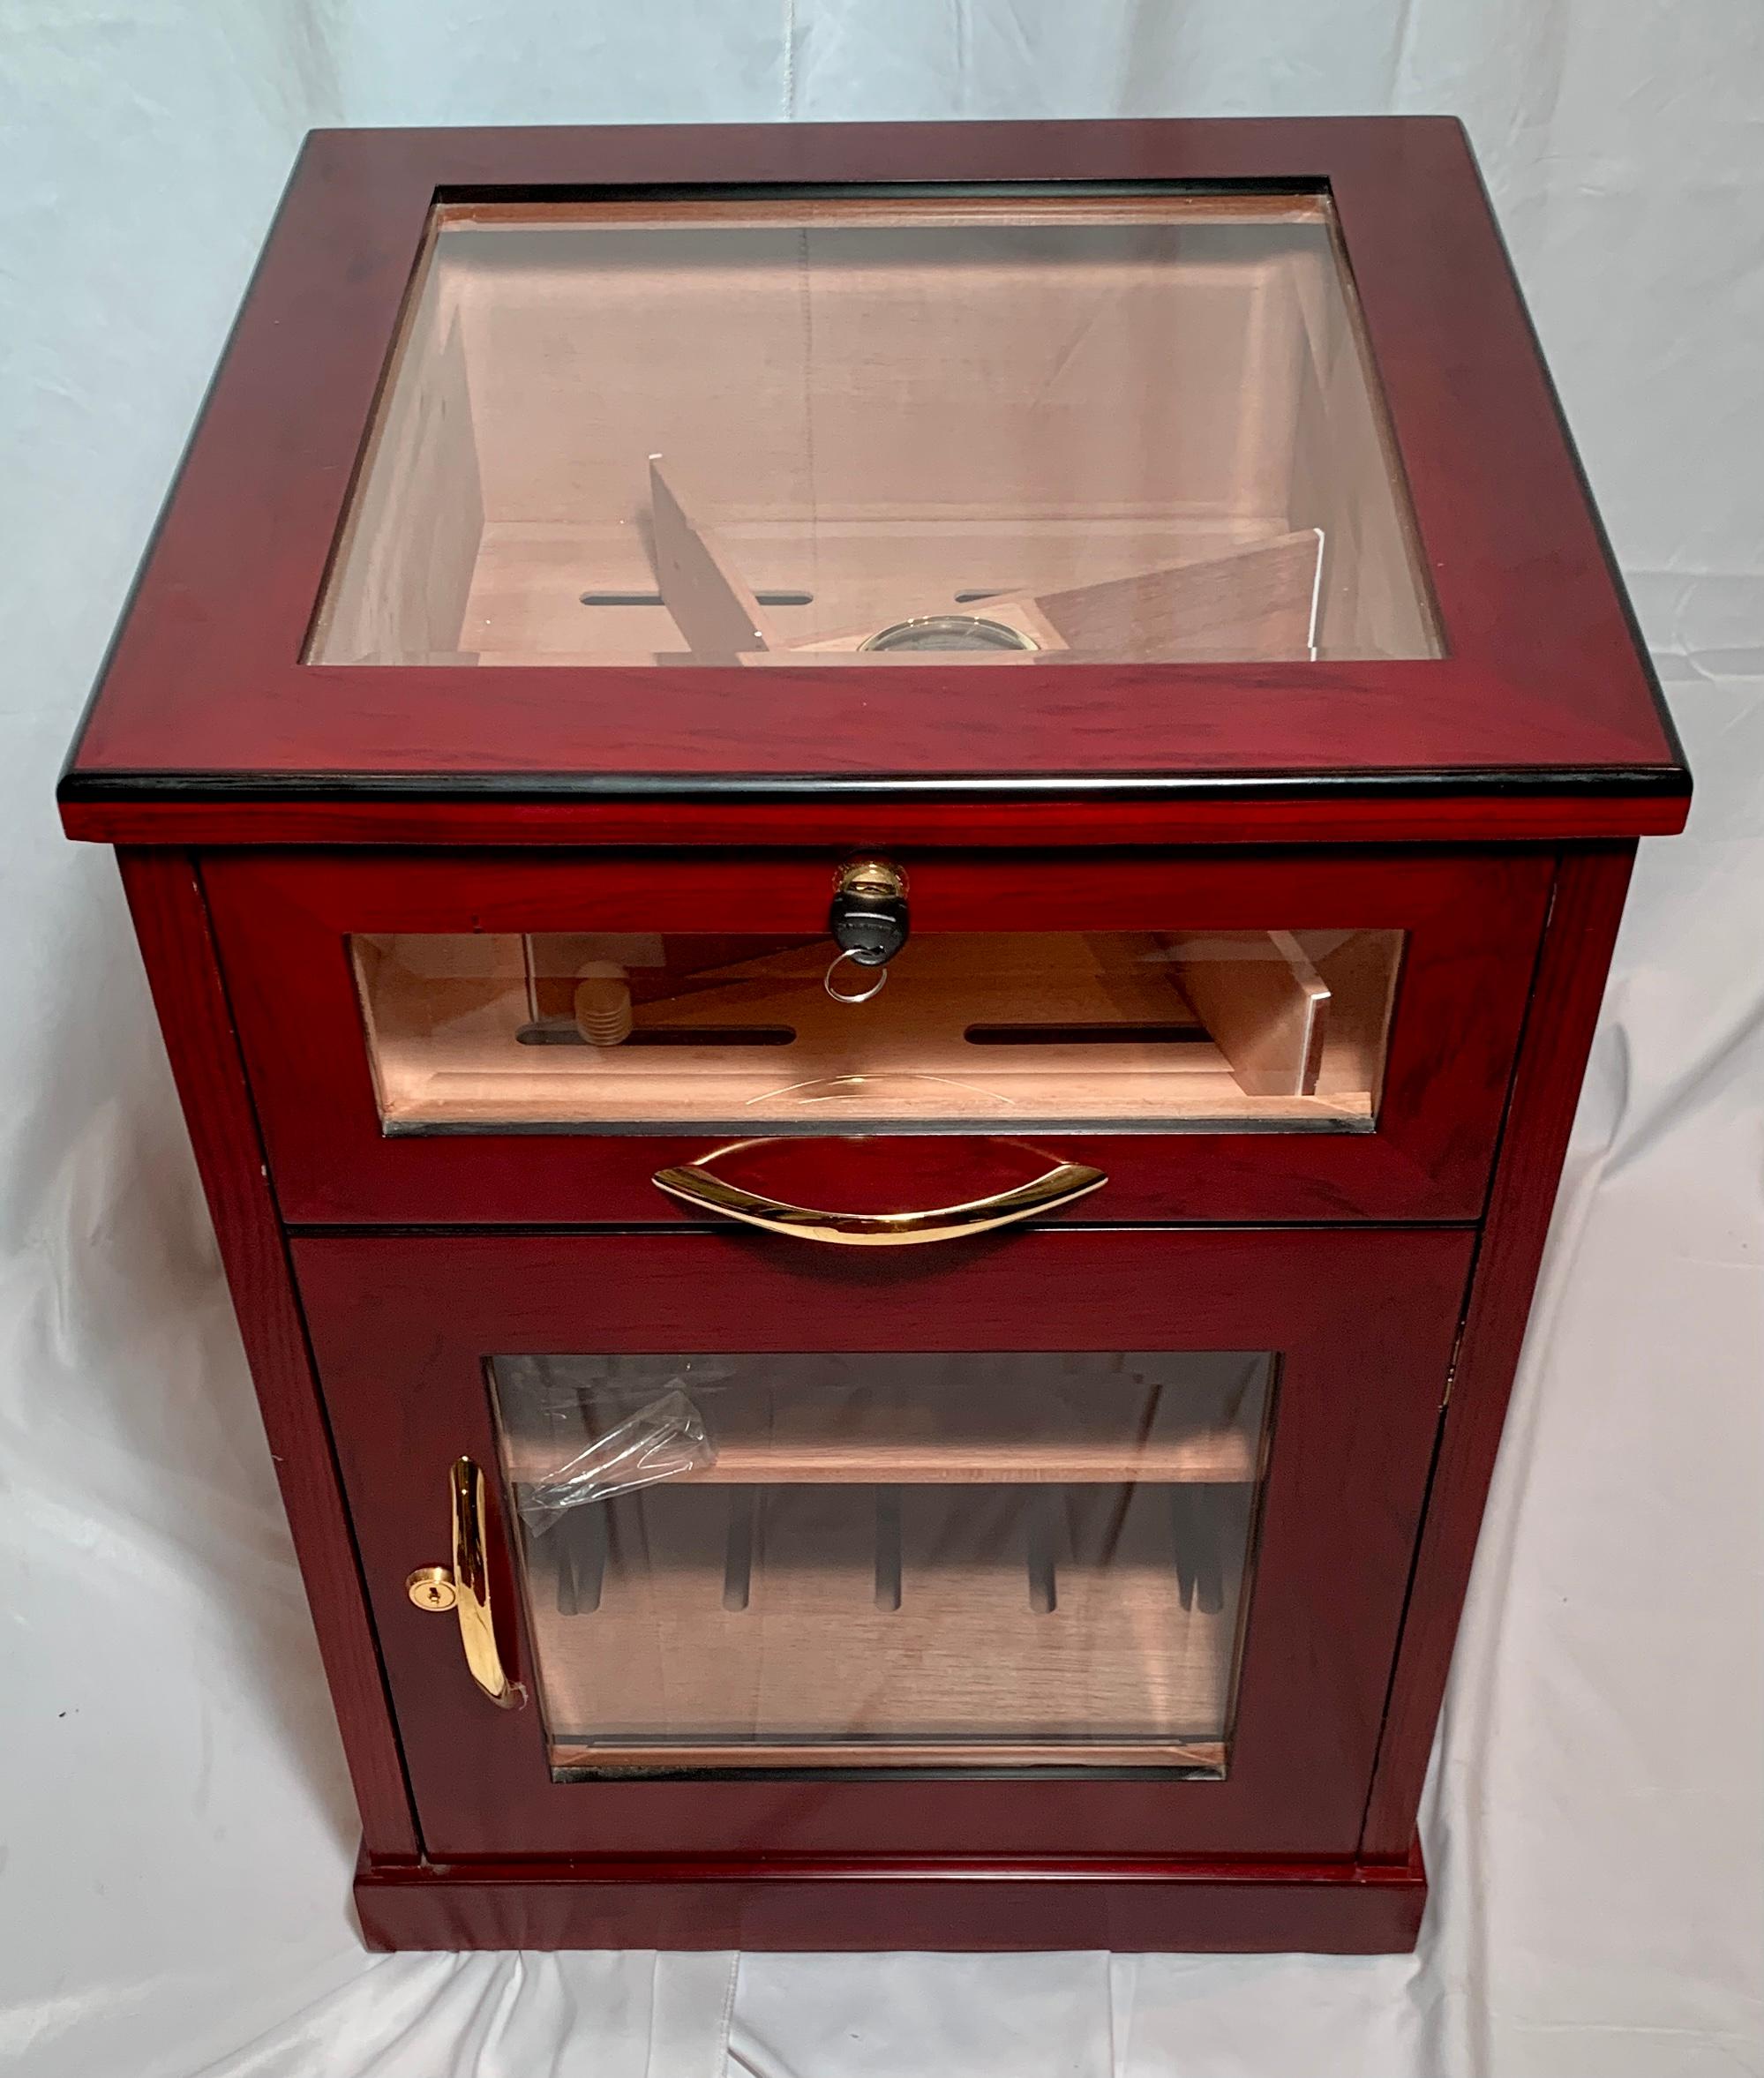 Handsome English beveled glass & brass mounted mahogany humidor.  Beautiful interior, glass top, slide drawer and front door with working lock and key.